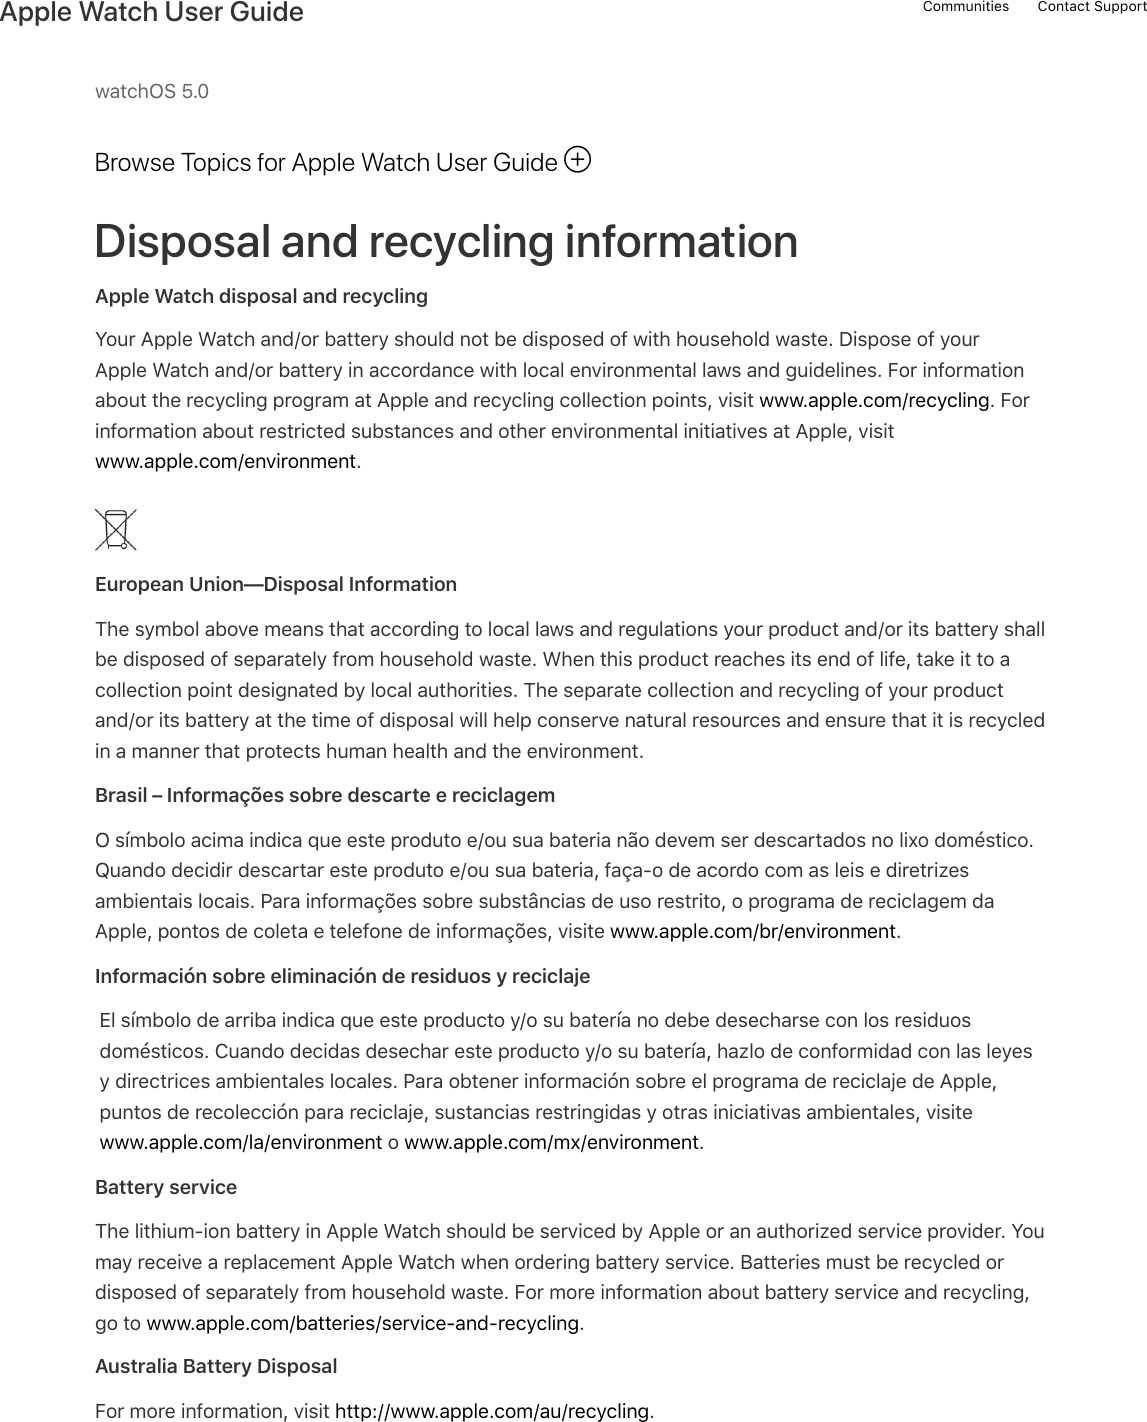 watchOS 5.0Browse Topics for Apple Watch User GuideDisposal and recycling informationApple Watch disposal and recyclingYour Apple Watch and/or battery should not be disposed of with household waste. Dispose of yourApple Watch and/or battery in accordance with local environmental laws and guidelines. For informationabout the recycling program at Apple and recycling collection points, visit www.apple.com/recycling. Forinformation about restricted substances and other environmental initiatives at Apple, visitwww.apple.com/environment.European Union—Disposal InformationThe symbol above means that according to local laws and regulations your product and/or its battery shallbe disposed of separately from household waste. When this product reaches its end of life, take it to acollection point designated by local authorities. The separate collection and recycling of your productand/or its battery at the time of disposal will help conserve natural resources and ensure that it is recycledin a manner that protects human health and the environment.Brasil – Informações sobre descarte e reciclagemO símbolo acima indica que este produto e/ou sua bateria não devem ser descartados no lixo doméstico.Quando decidir descartar este produto e/ou sua bateria, faça-o de acordo com as leis e diretrizesambientais locais. Para informações sobre substâncias de uso restrito, o programa de reciclagem daApple, pontos de coleta e telefone de informações, visite www.apple.com/br/environment.Información sobre eliminación de residuos y reciclajeEl símbolo de arriba indica que este producto y/o su batería no debe desecharse con los residuosdomésticos. Cuando decidas desechar este producto y/o su batería, hazlo de conformidad con las leyesy directrices ambientales locales. Para obtener información sobre el programa de reciclaje de Apple,puntos de recolección para reciclaje, sustancias restringidas y otras iniciativas ambientales, visitewww.apple.com/la/environment o www.apple.com/mx/environment.Battery serviceThe lithium-ion battery in Apple Watch should be serviced by Apple or an authorized service provider. Youmay receive a replacement Apple Watch when ordering battery service. Batteries must be recycled ordisposed of separately from household waste. For more information about battery service and recycling,go to www.apple.com/batteries/service-and-recycling.Australia Battery DisposalFor more information, visit http://www.apple.com/au/recycling.!Communities Contact SupportApple Watch User Guide